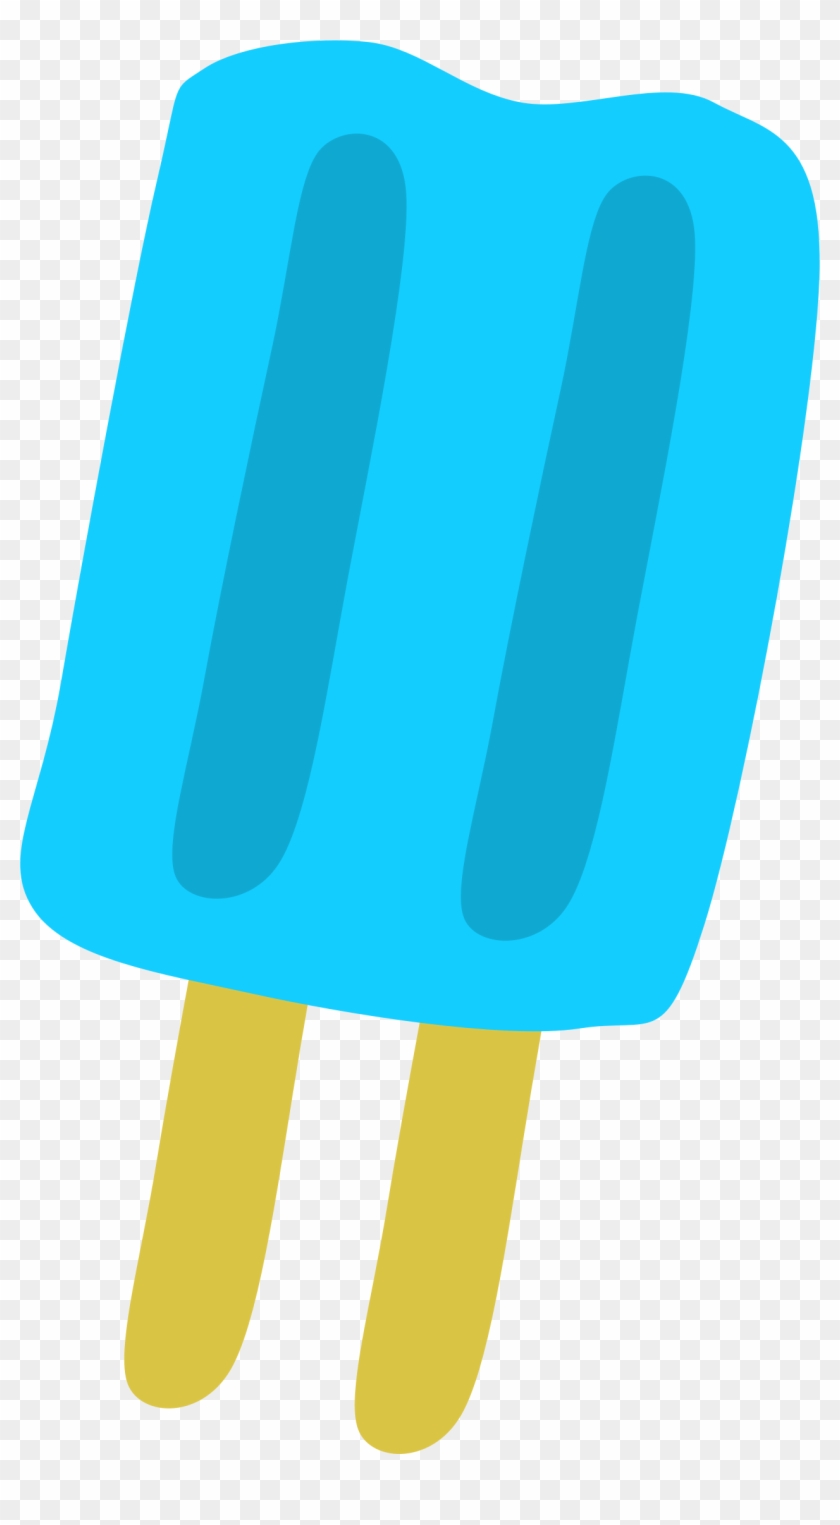 Blue Popsicle By Scout A Clipart Of An Blue Popsicle - Popsicle Clip Art Png #40844